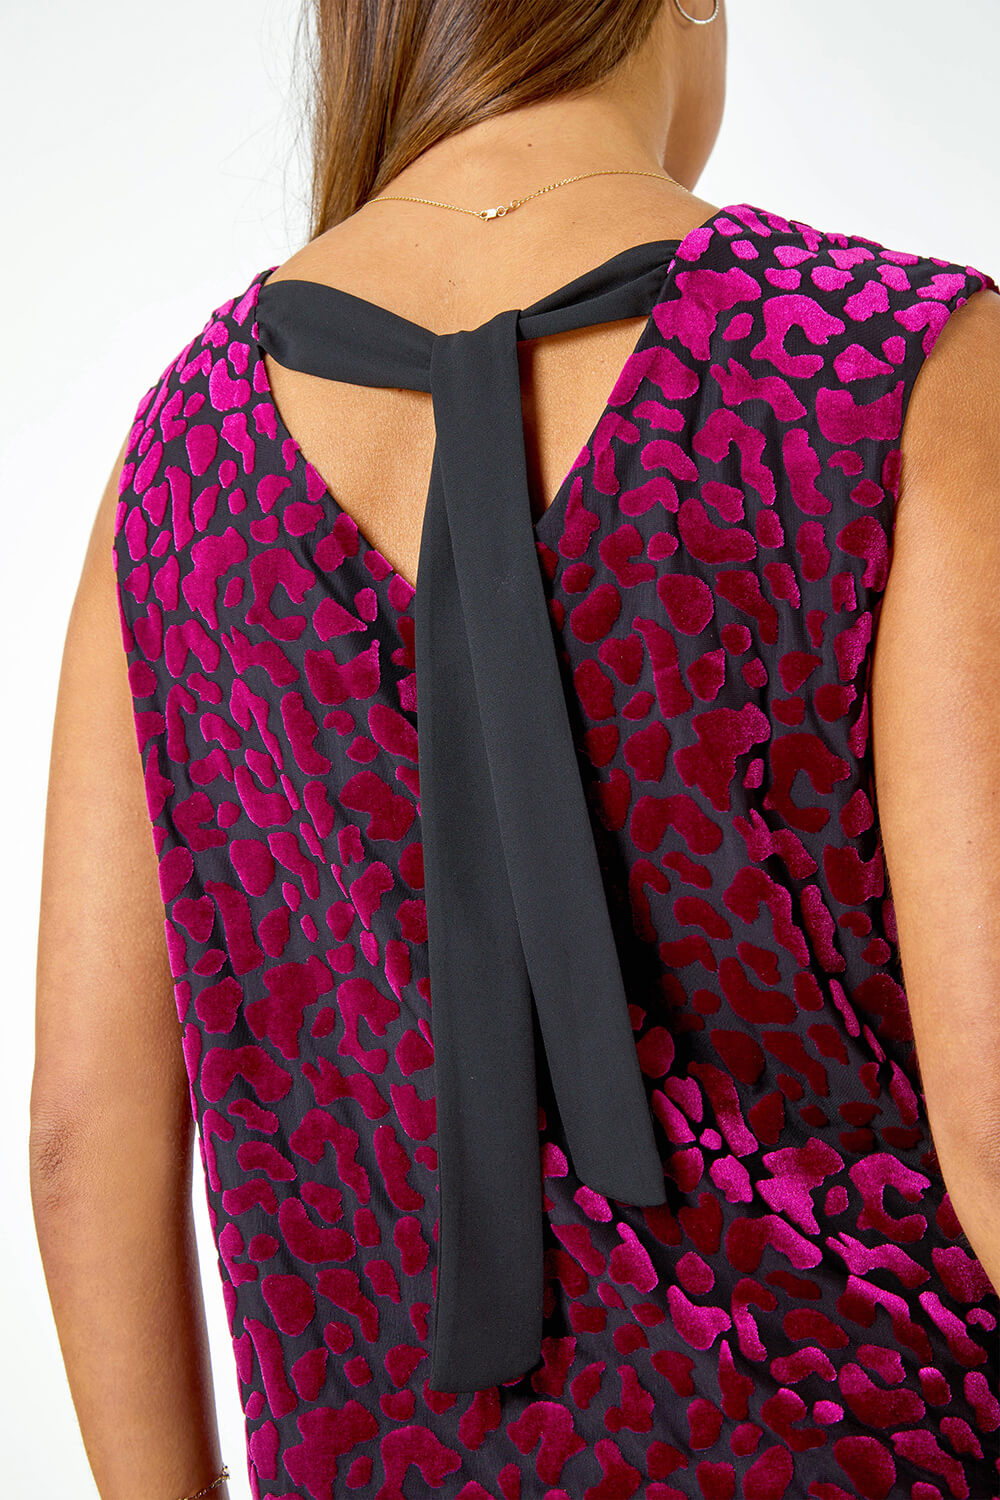 MAGENTA Textured Animal Tie Back Stretch Top, Image 5 of 5